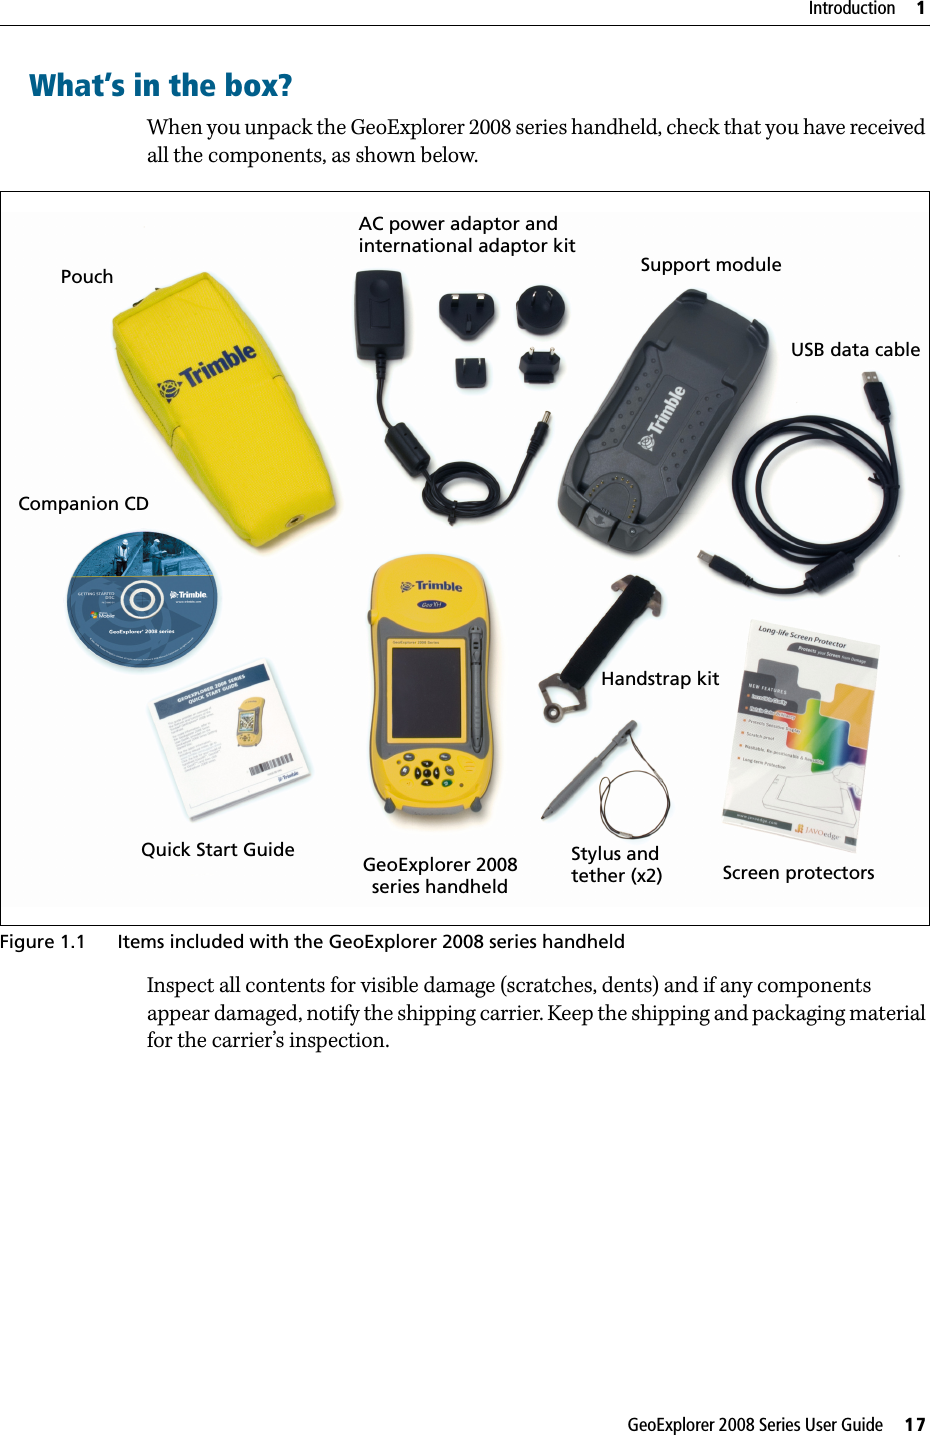 GeoExplorer 2008 Series User Guide     17Introduction     1What’s in the box?When you unpack the GeoExplorer 2008 series handheld, check that you have received all the components, as shown below.   Figure 1.1 Items included with the GeoExplorer 2008 series handheldInspect all contents for visible damage (scratches, dents) and if any components appear damaged, notify the shipping carrier. Keep the shipping and packaging material for the carrier’s inspection.       GeoExplorer 2008PouchQuick Start Guideseries handheldAC power adaptor andCompanion CDUSB data cableStylus and Support module international adaptor kitScreen protectors Handstrap kit tether (x2)